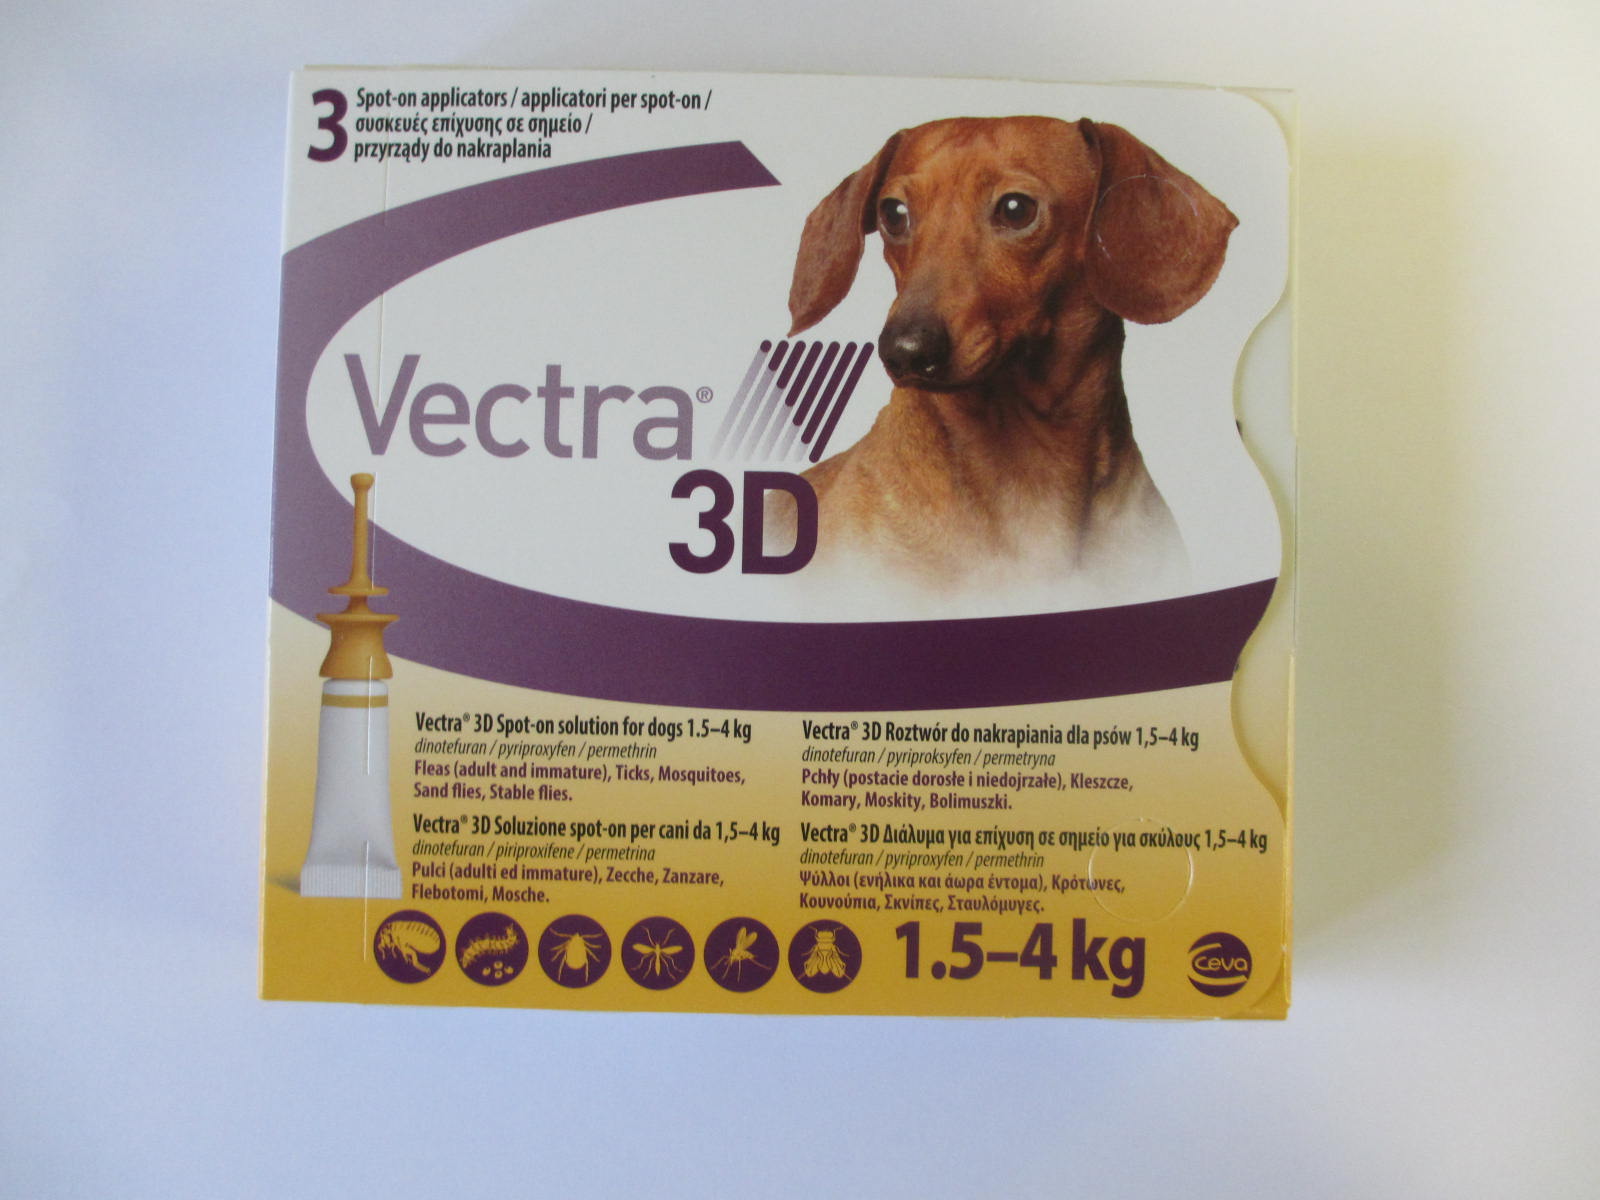 Vectra 3D for Dogs - 5 - 10 lbs - Orange - 3 pack - $35.40 | Flea